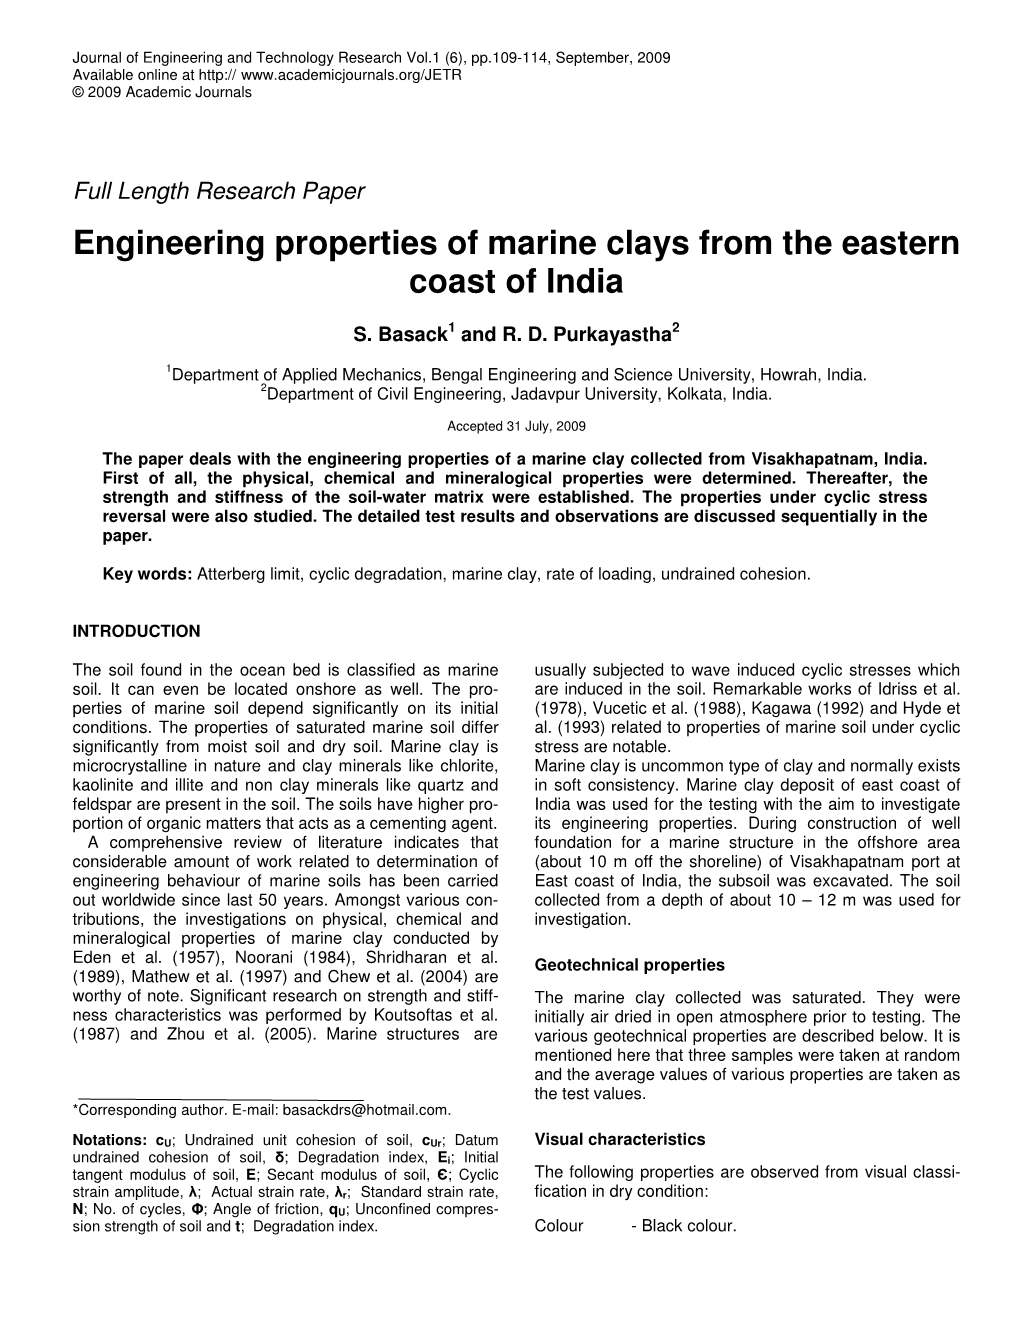 Engineering Properties of Marine Clays from the Eastern Coast of India